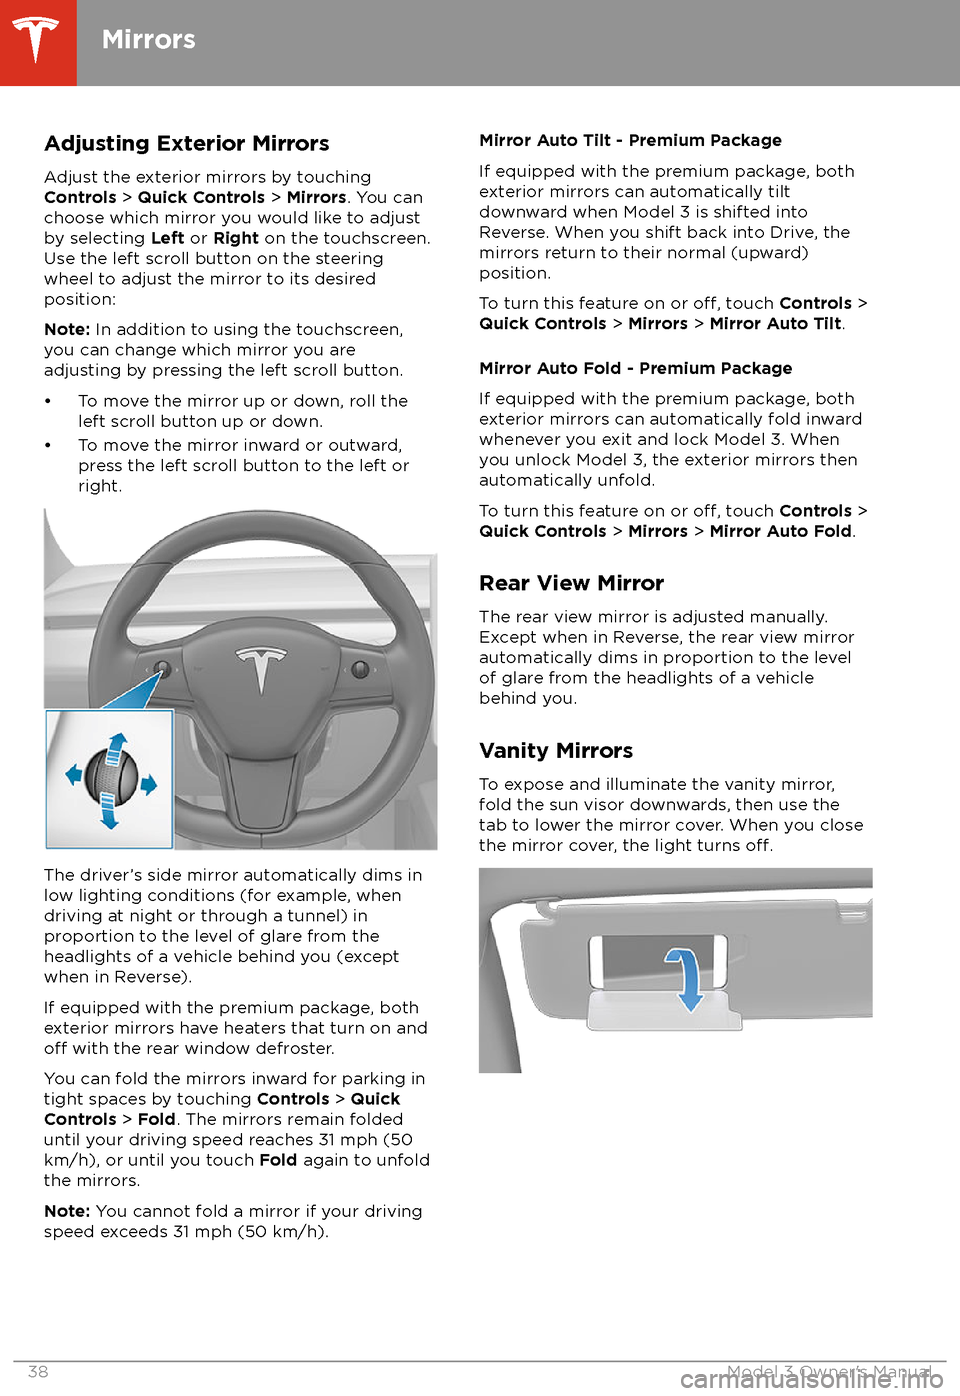 TESLA MODEL 3 2018  Owners Manual Adjusting Exterior MirrorsAdjust the exterior mirrors by touchingControls  > Quick Controls  > Mirrors . You can
choose which mirror you would like to adjust
by selecting  Left or Right  on the touchs